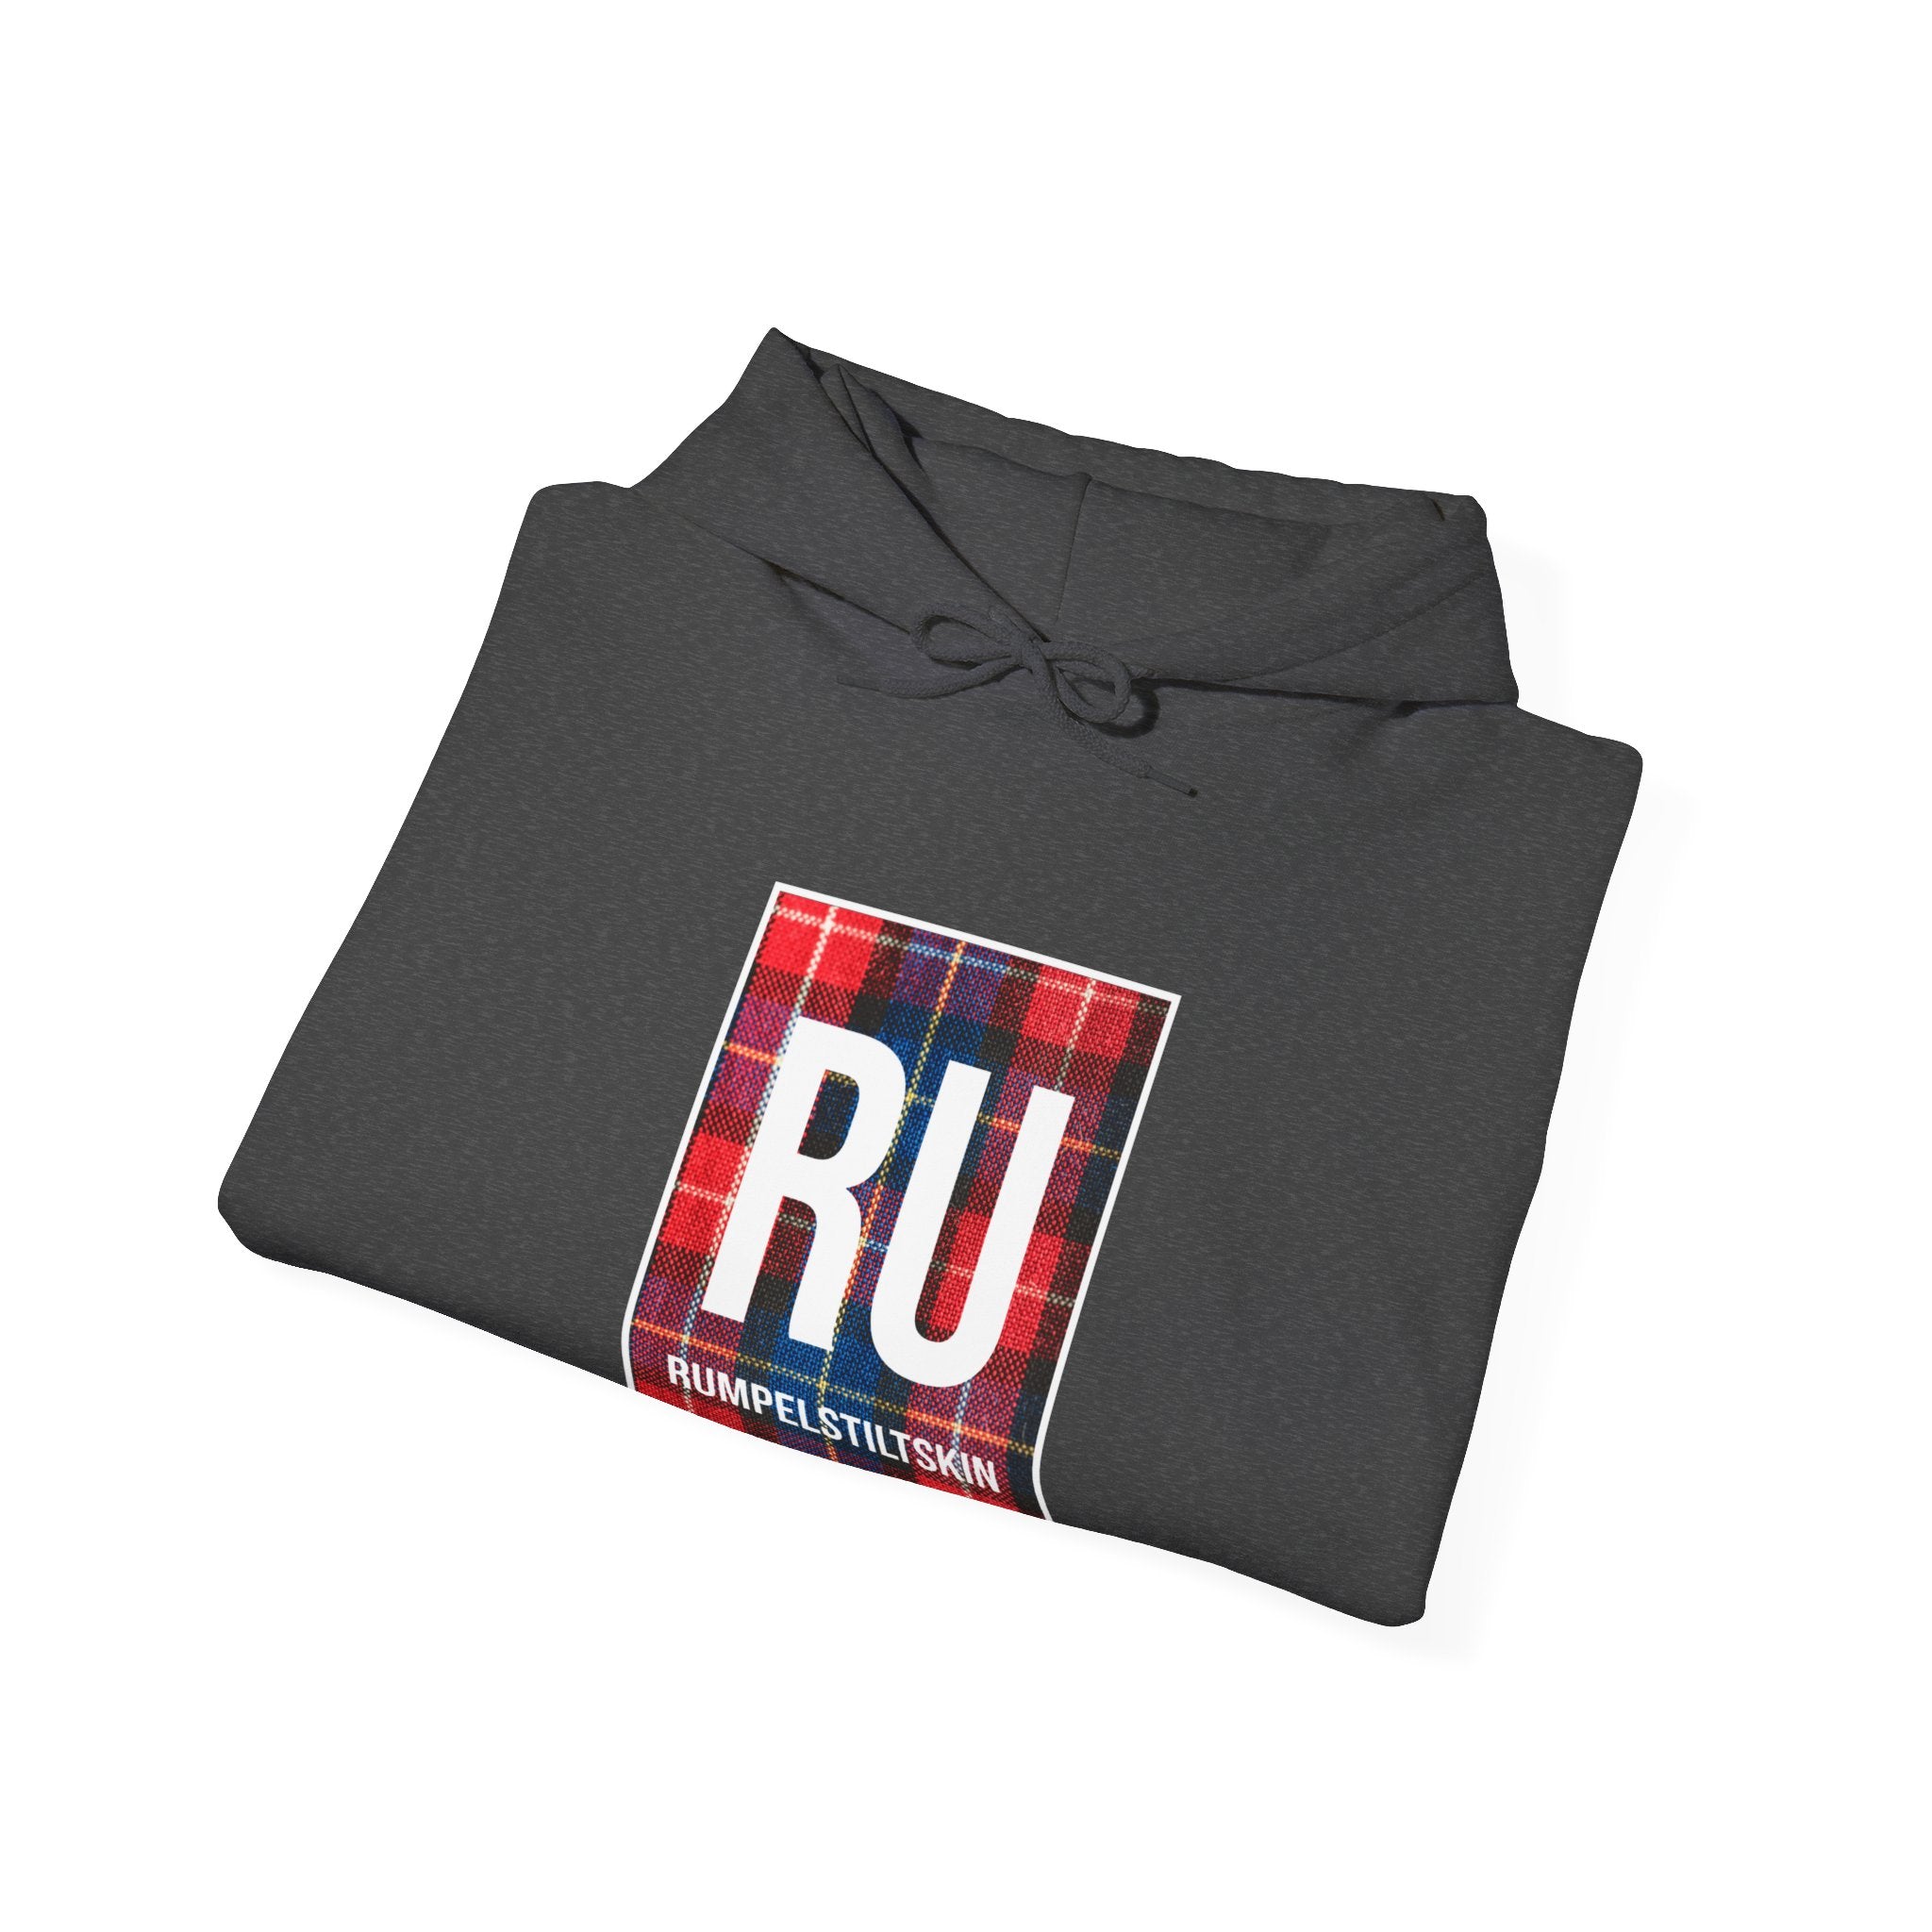 Folded dark gray RU - Hooded Sweatshirt featuring a plaid-patterned "RU" logo and the word "Rumpelstiltskin" below it, offering the perfect blend of style and ultimate comfort.